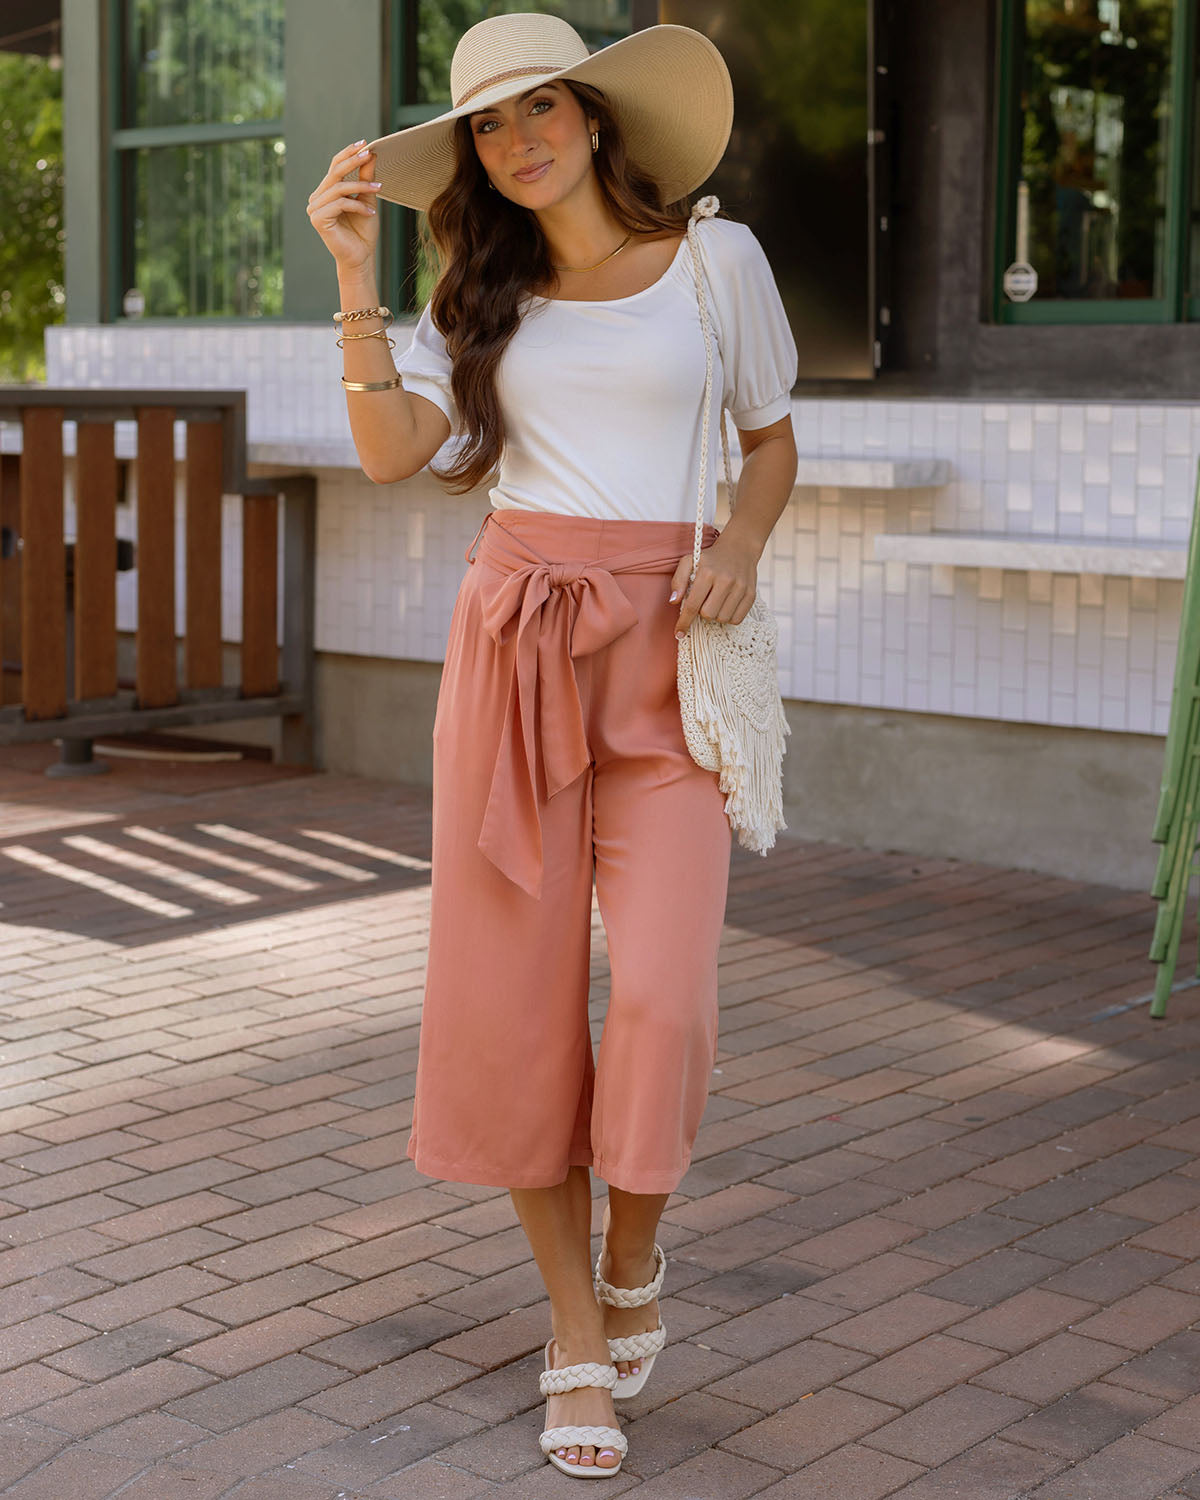 loyalty Anemone fish pension pink cropped pants Dignified Sandals